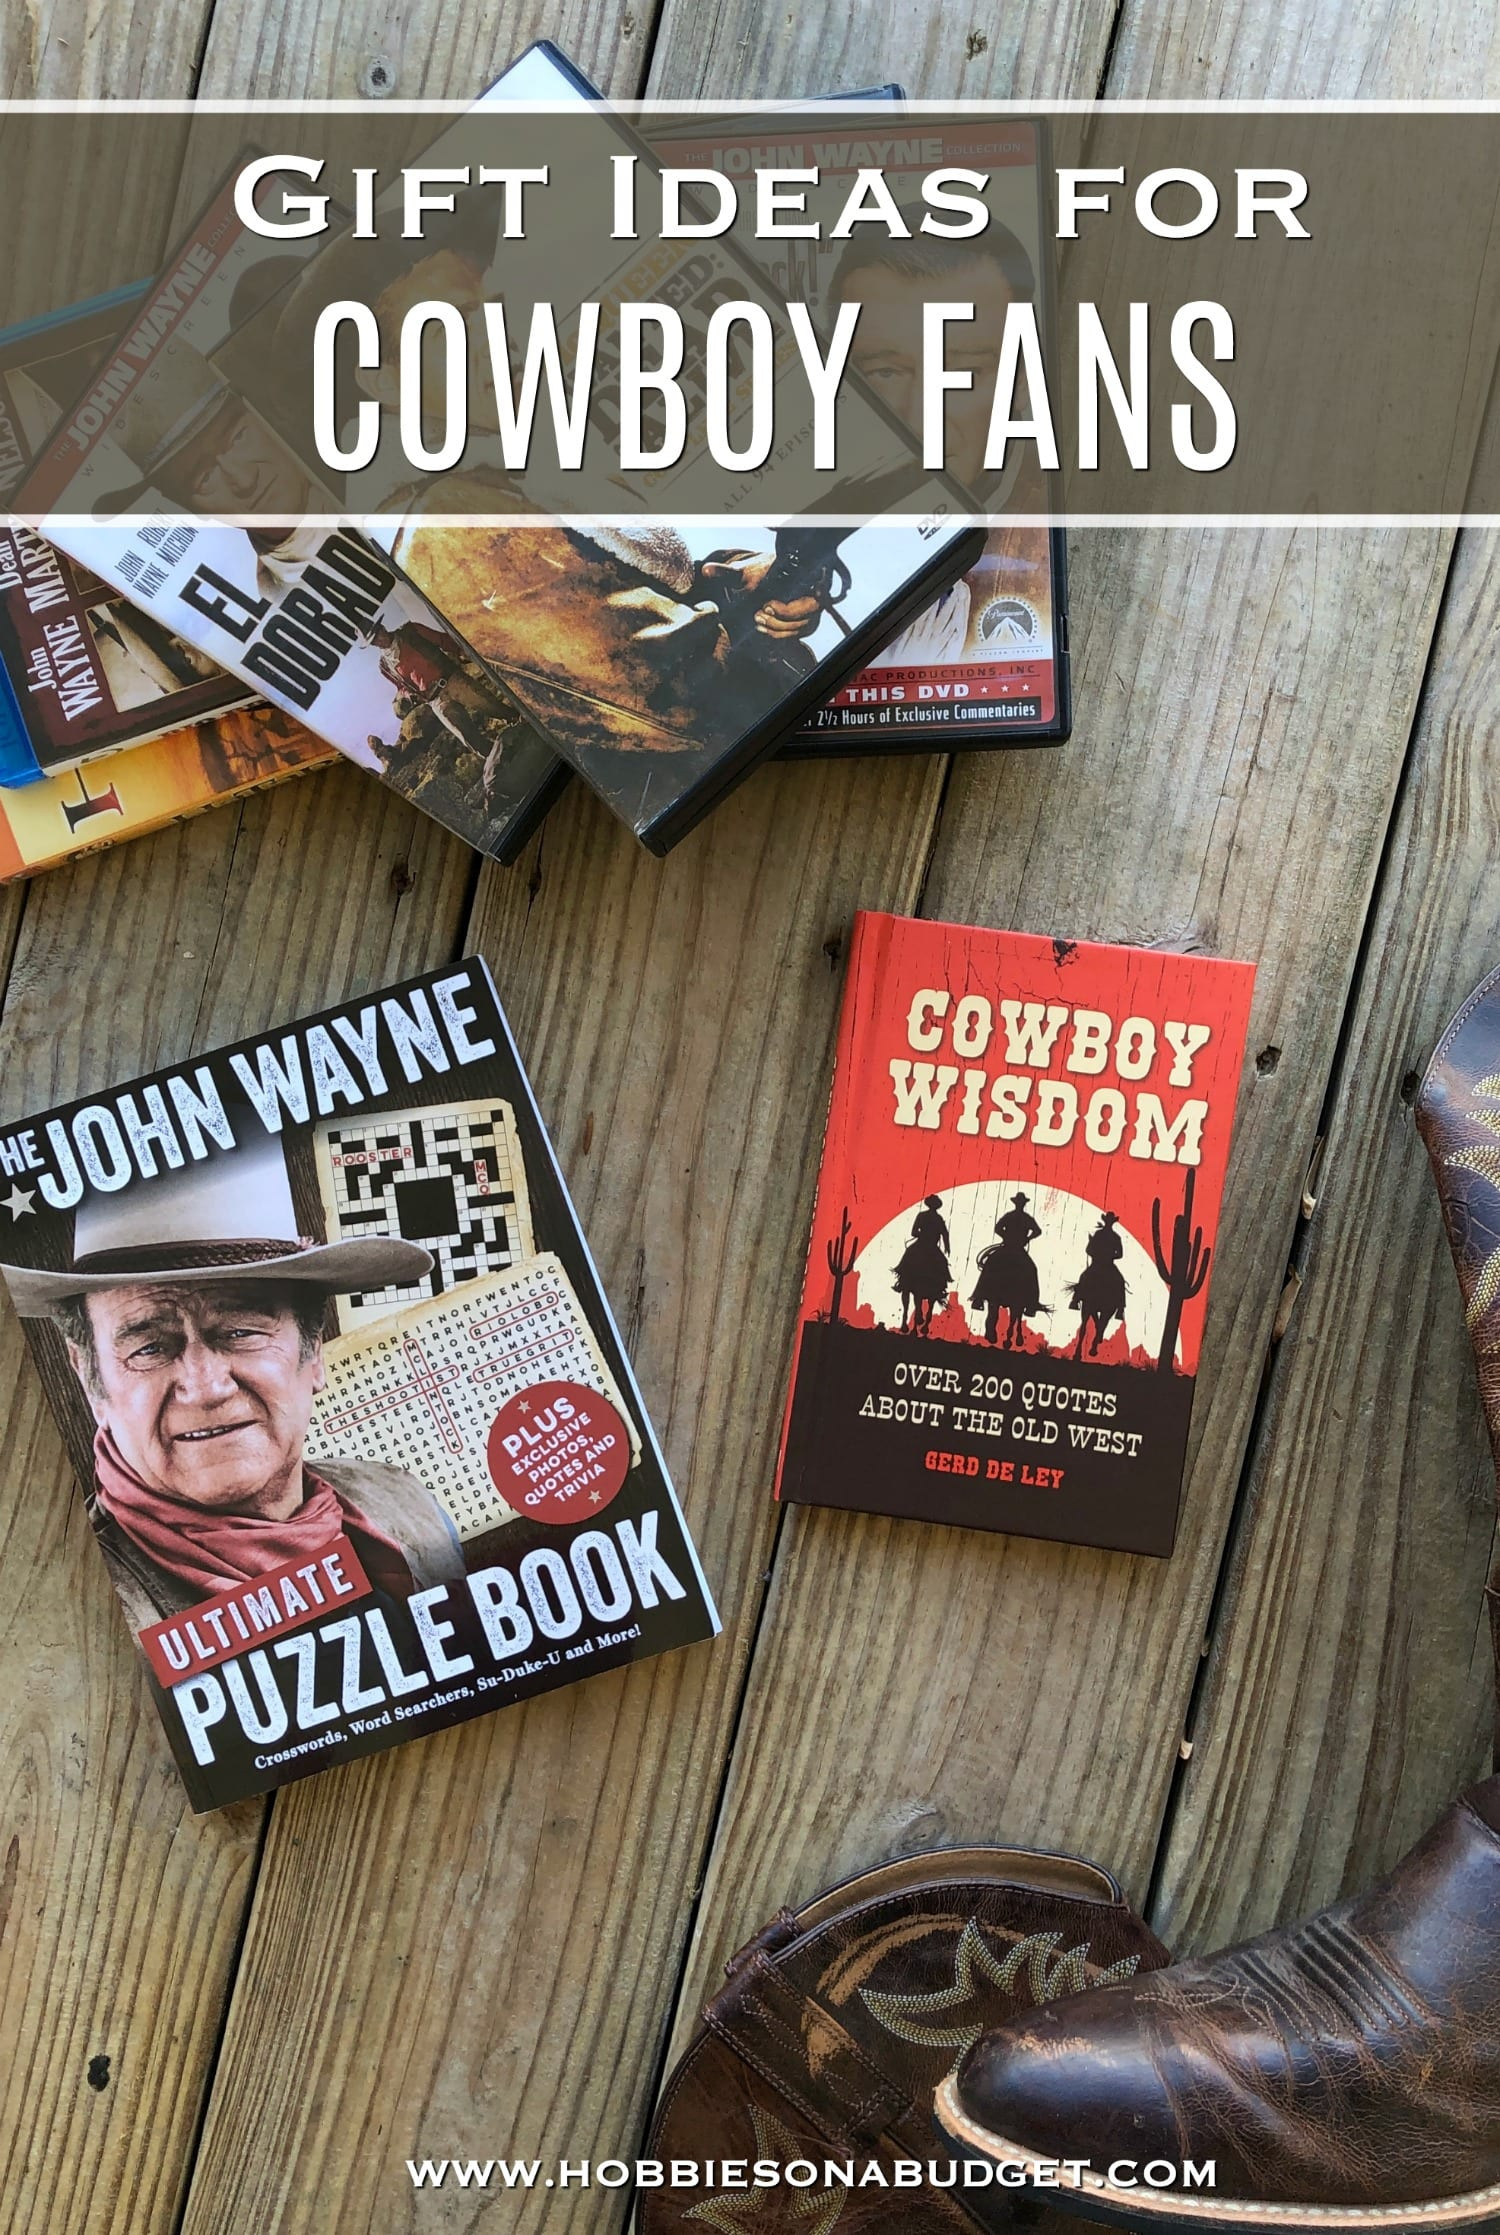 Cowboys Gift Ideas
 Gift Ideas for Cowboy Fans Hobbies on a Bud